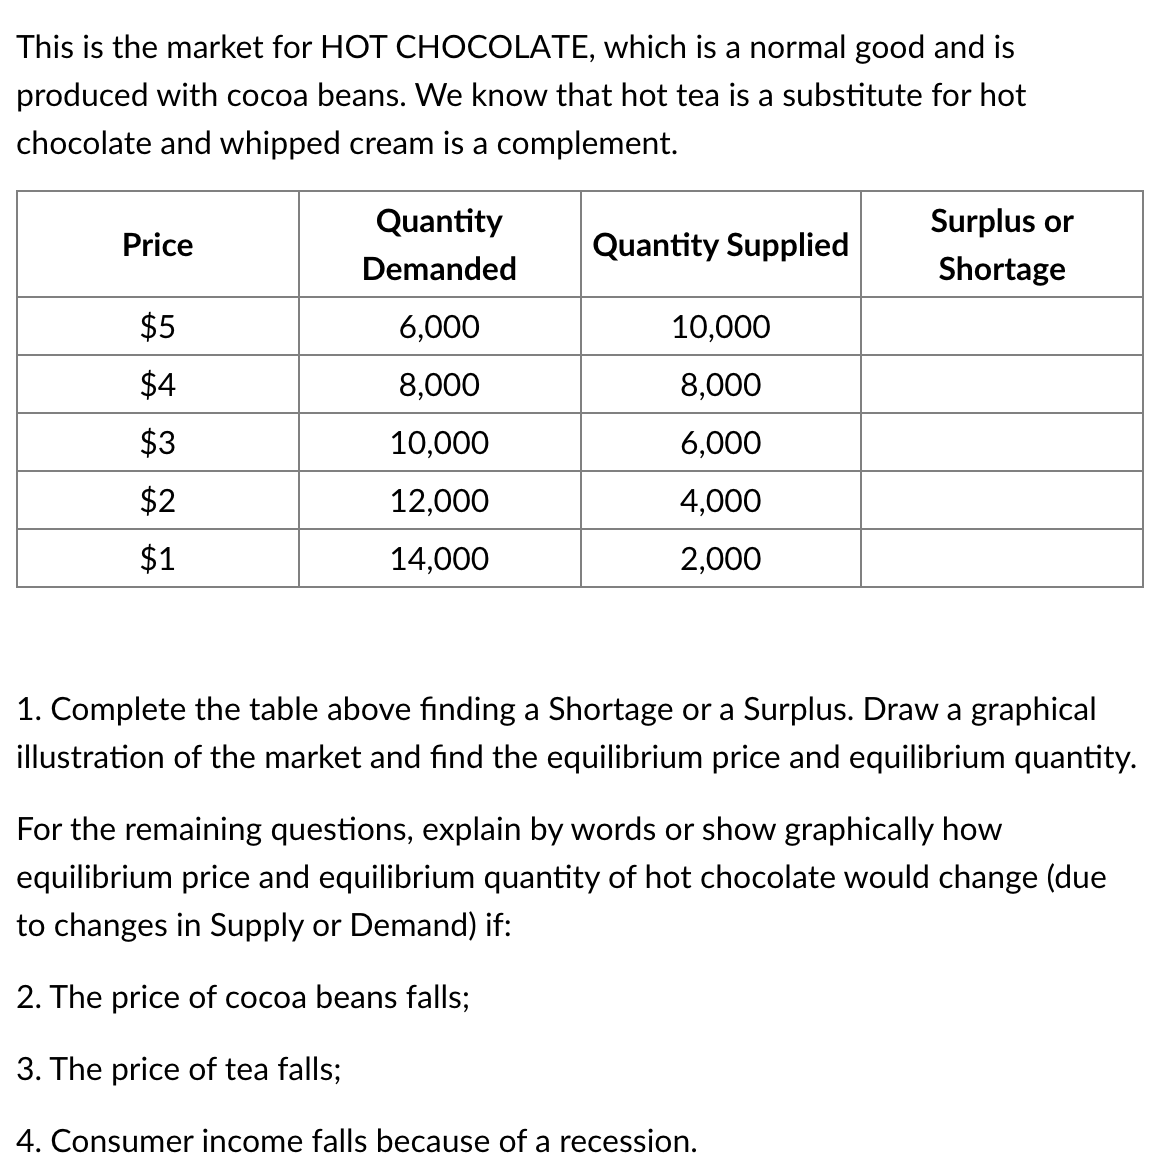 This is the market for HOT CHOCOLATE, which is a normal good and is
produced with cocoa beans. We know that hot tea is a substitute for hot
chocolate and whipped cream is a complement.
Quantity
Surplus or
Price
Quantity Supplied
Demanded
Shortage
$5
6,000
10,000
$4
8,000
8,000
$3
10,000
6,000
$2
12,000
4,000
$1
14,000
2,000
1. Complete the table above finding a Shortage or a Surplus. Draw a graphical
illustration of the market and find the equilibrium price and equilibrium quantity.
For the remaining questions, explain by words or show graphically how
equilibrium price and equilibrium quantity of hot chocolate would change (due
to changes in Supply or Demand) if:
2. The price of cocoa beans falls;
3. The price of tea falls;
4. Consumer income falls because of a recession.
